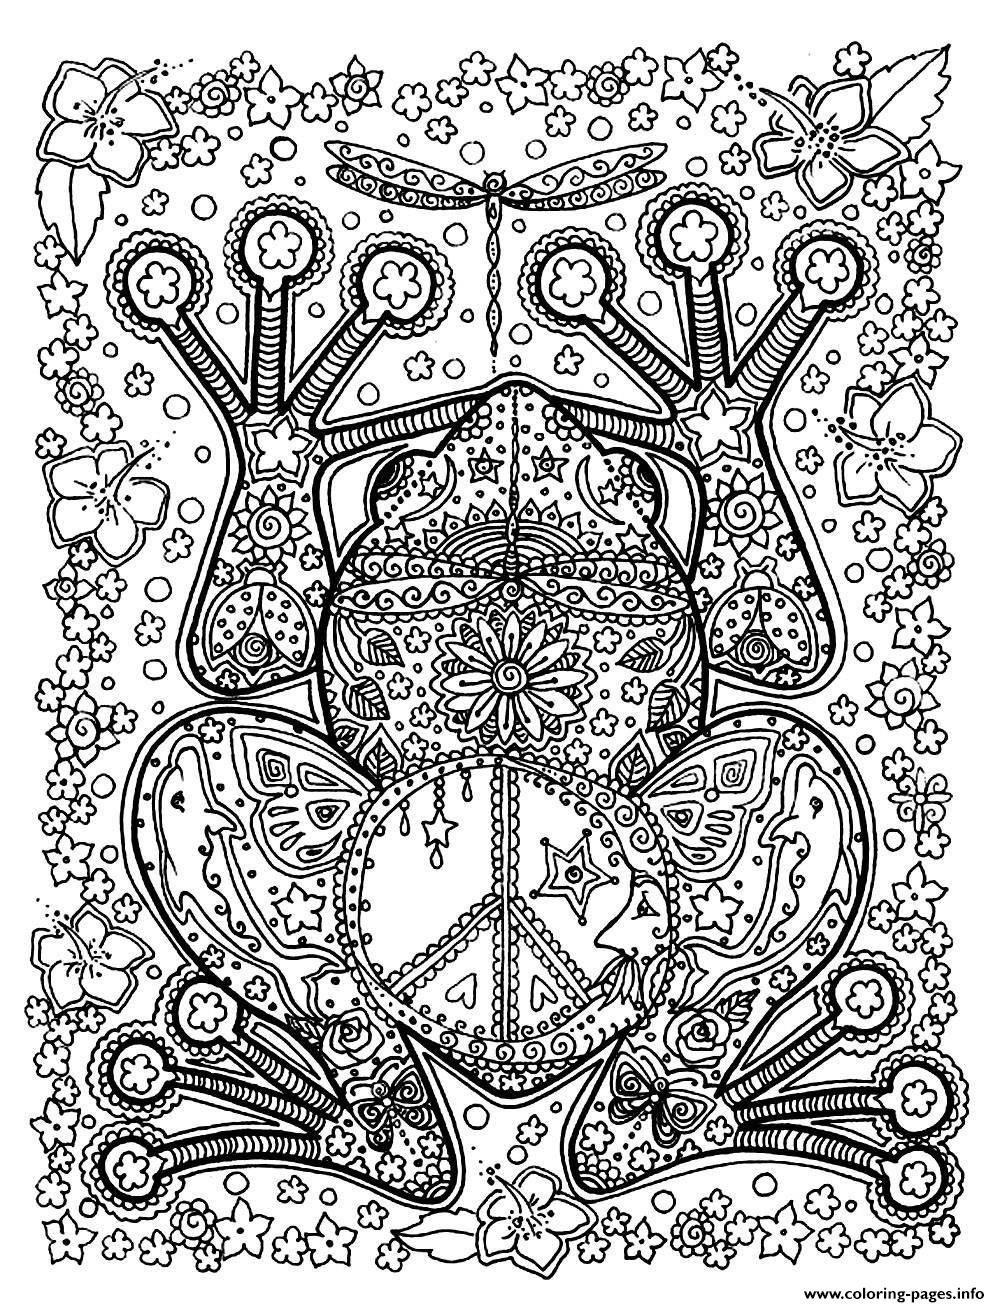 Big Coloring Pages For Adults
 Animal Coloring Pages For Adults Printable